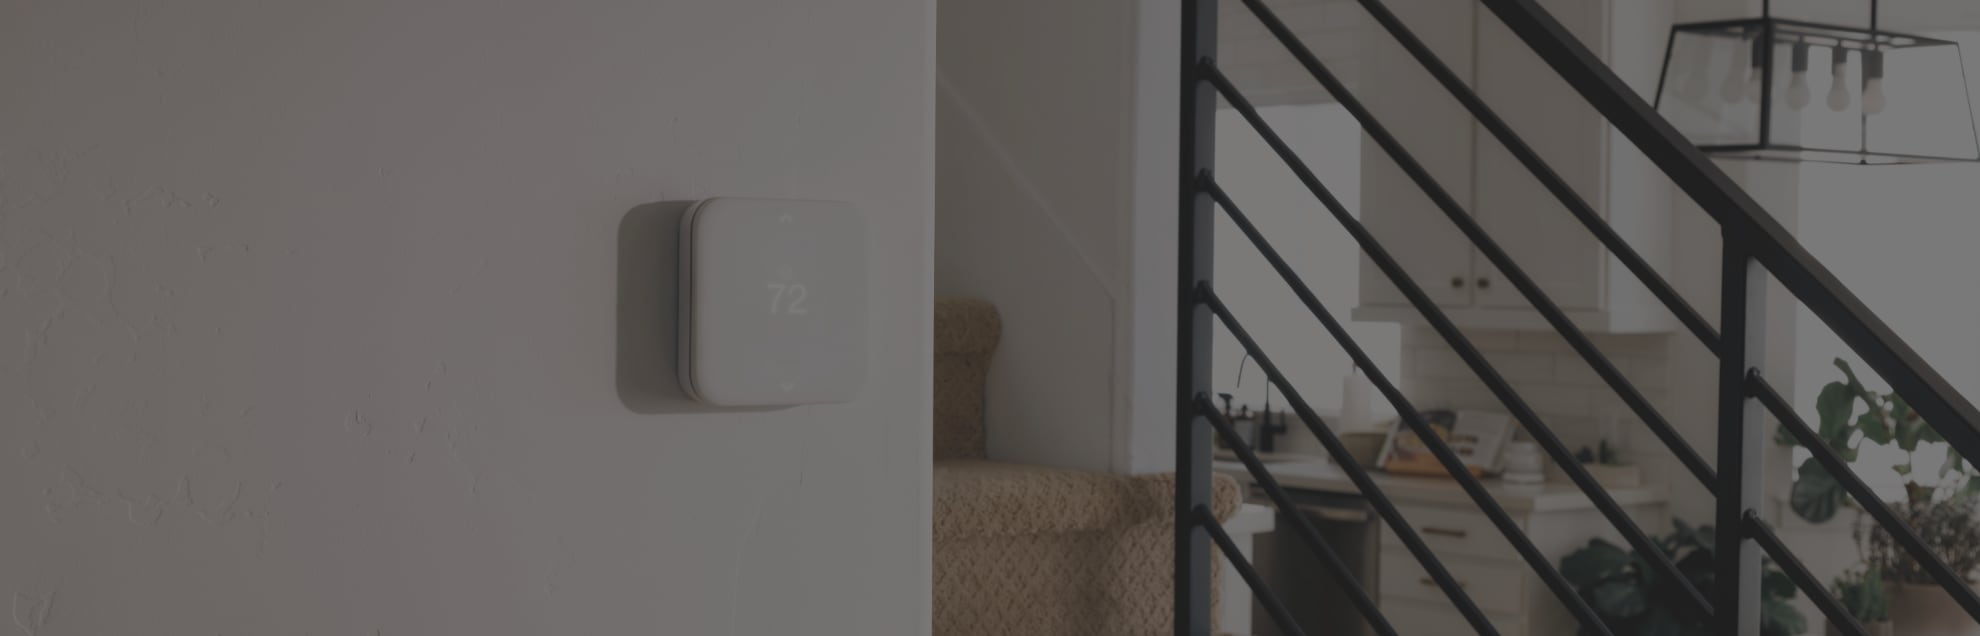 Florence Smart Thermostat